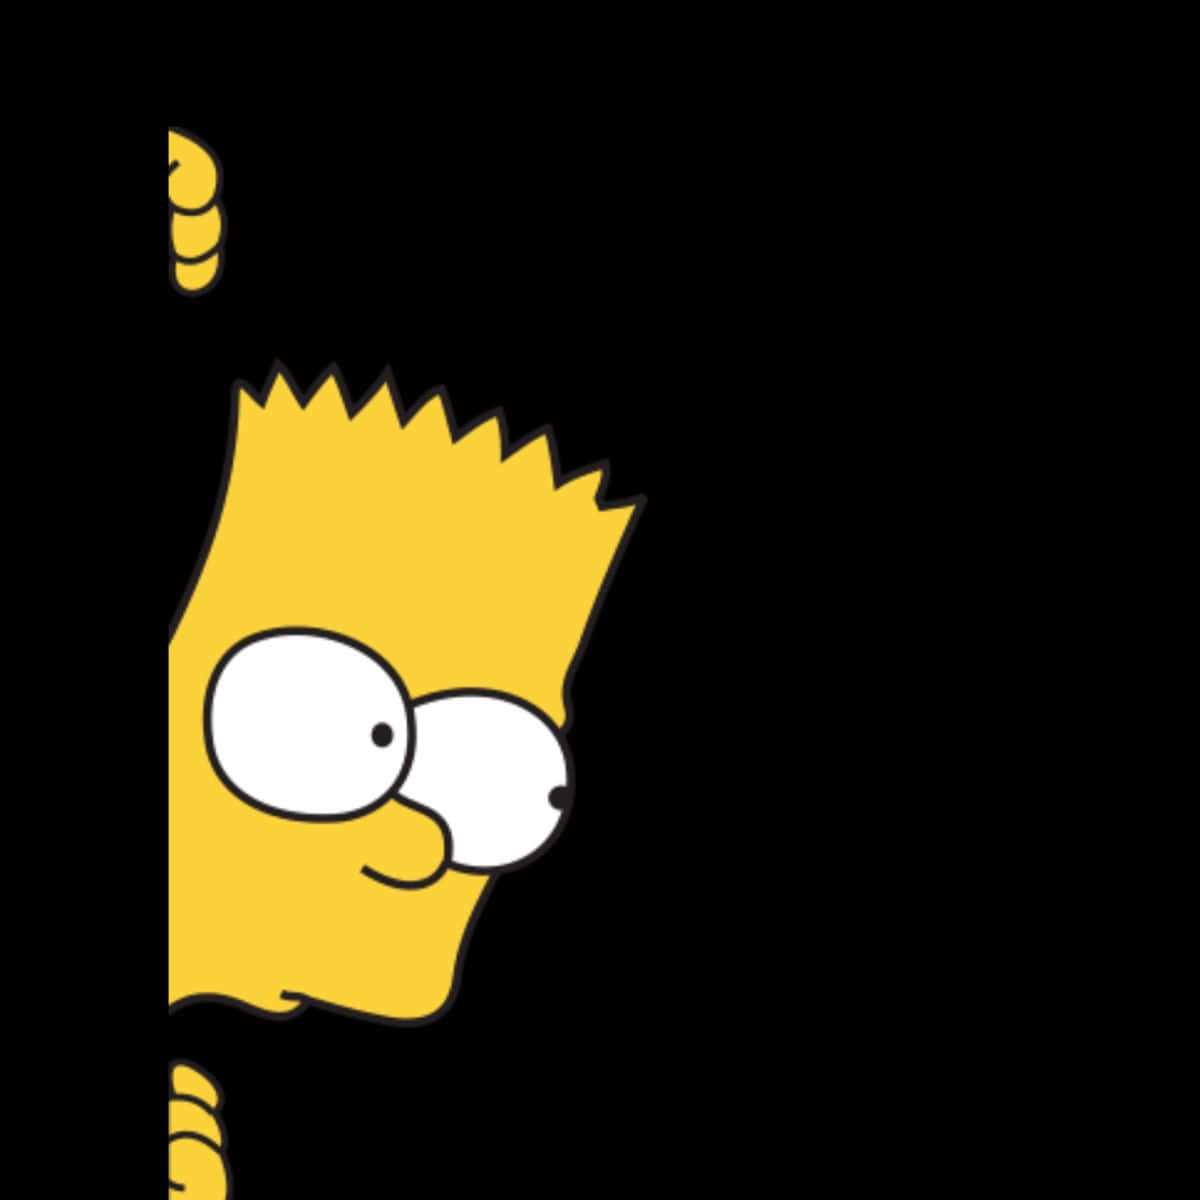 Isimpson - Png - Png - Png - Png - Png